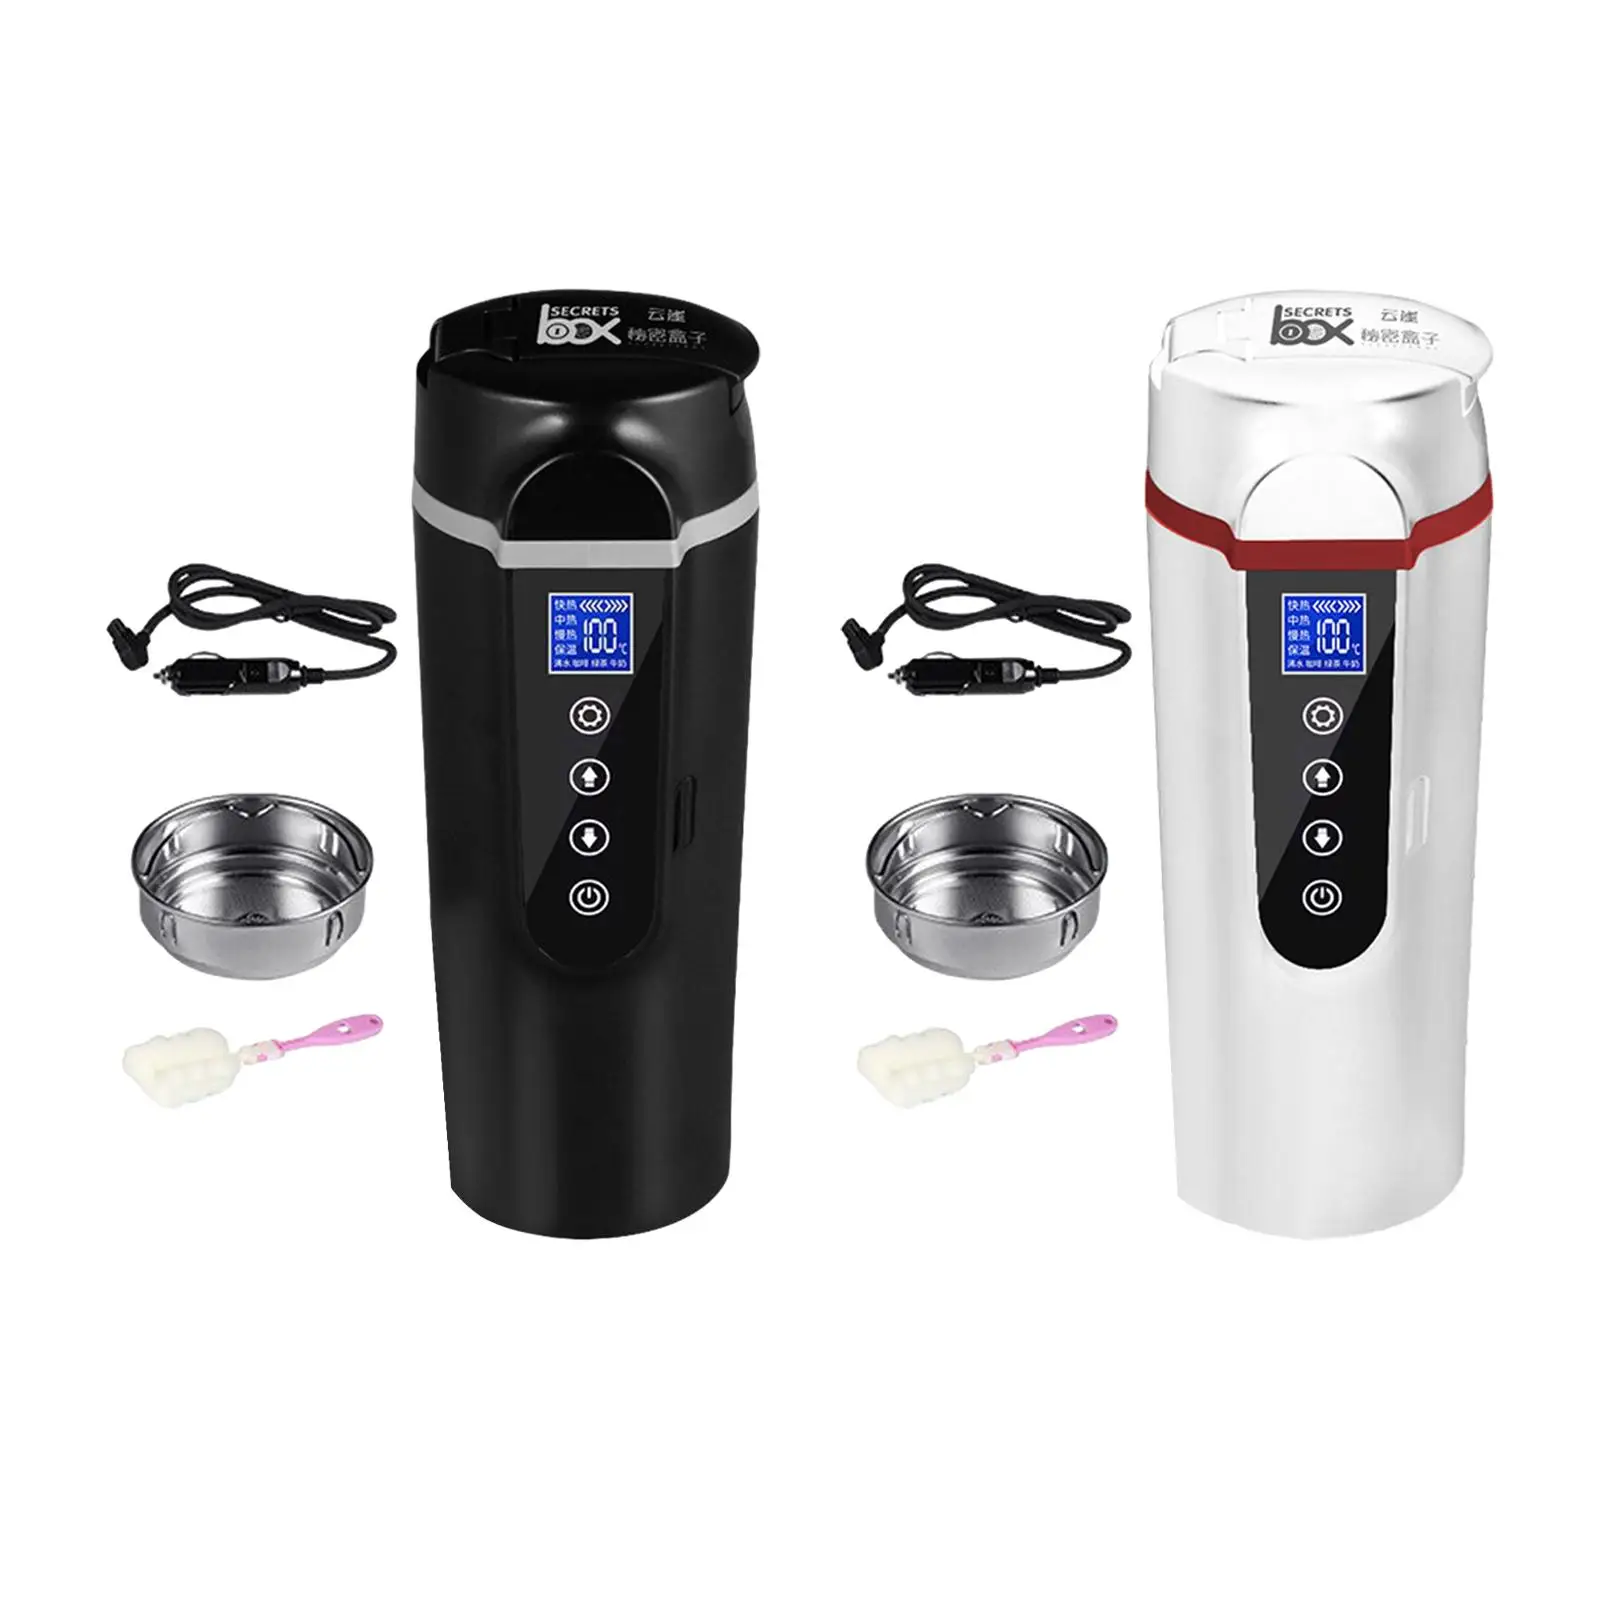 Car Heating Cup Quick Heating Intelligent Drinking Bottle Travel Coffee Mug for Trip Drivers Airplane Car Truck Tea Water Milk